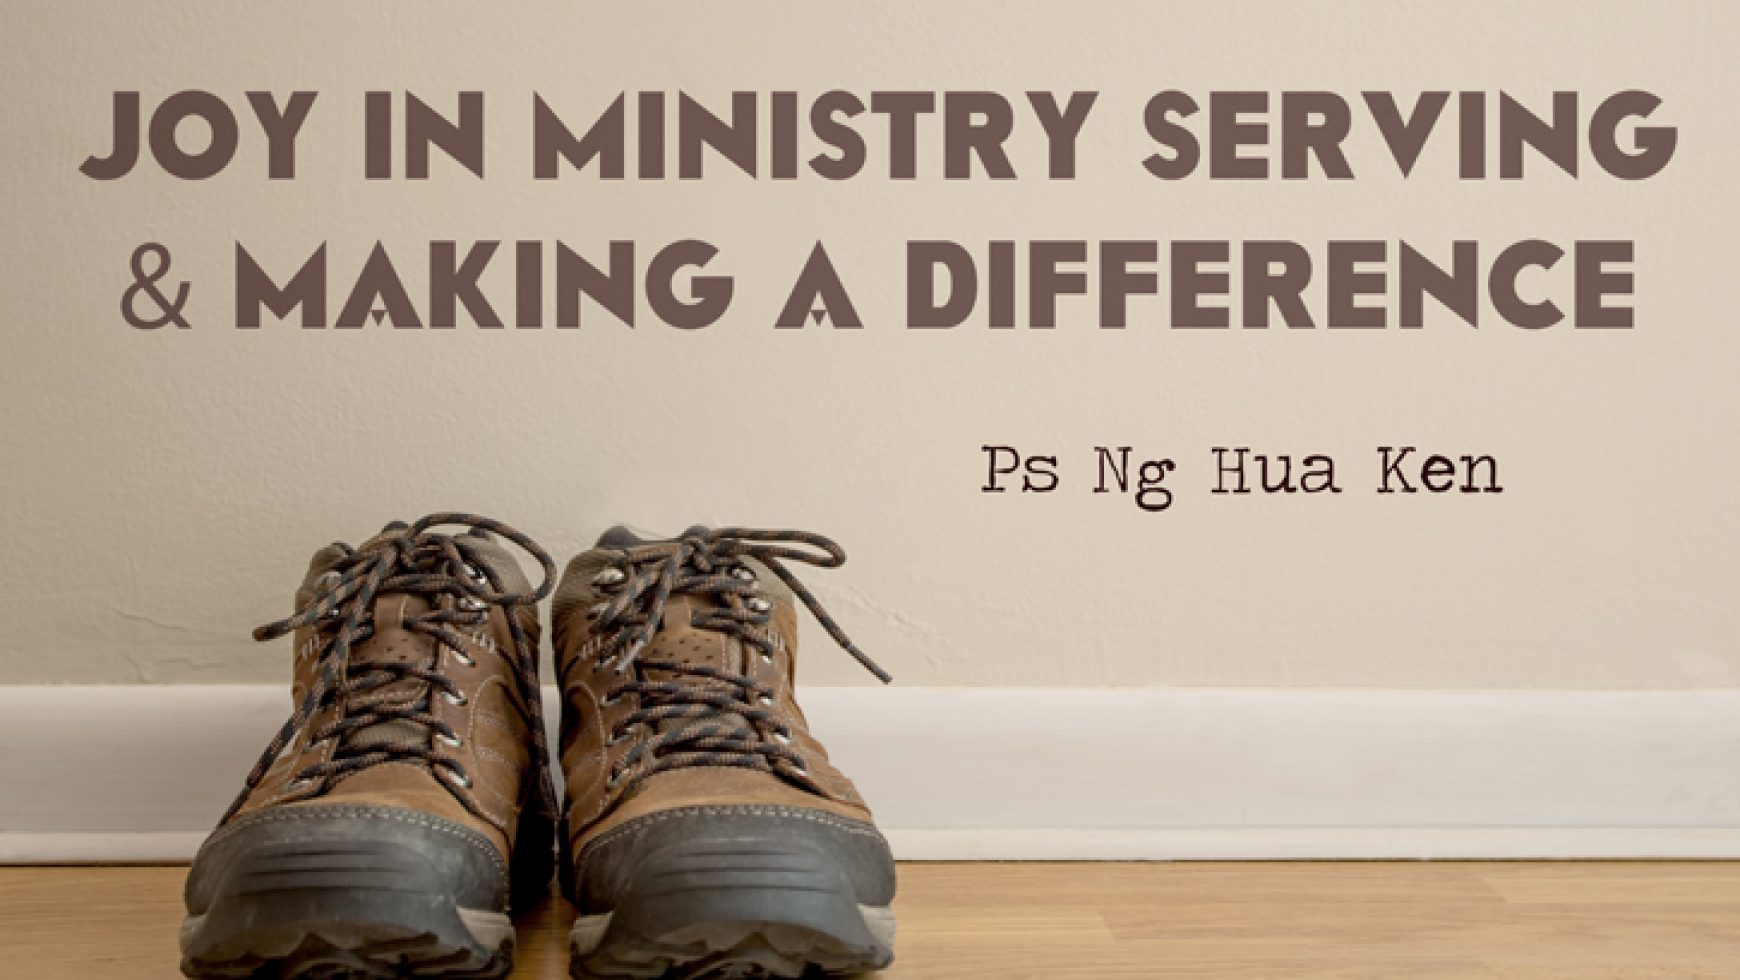 Joy in Ministry Serving and Making a Difference